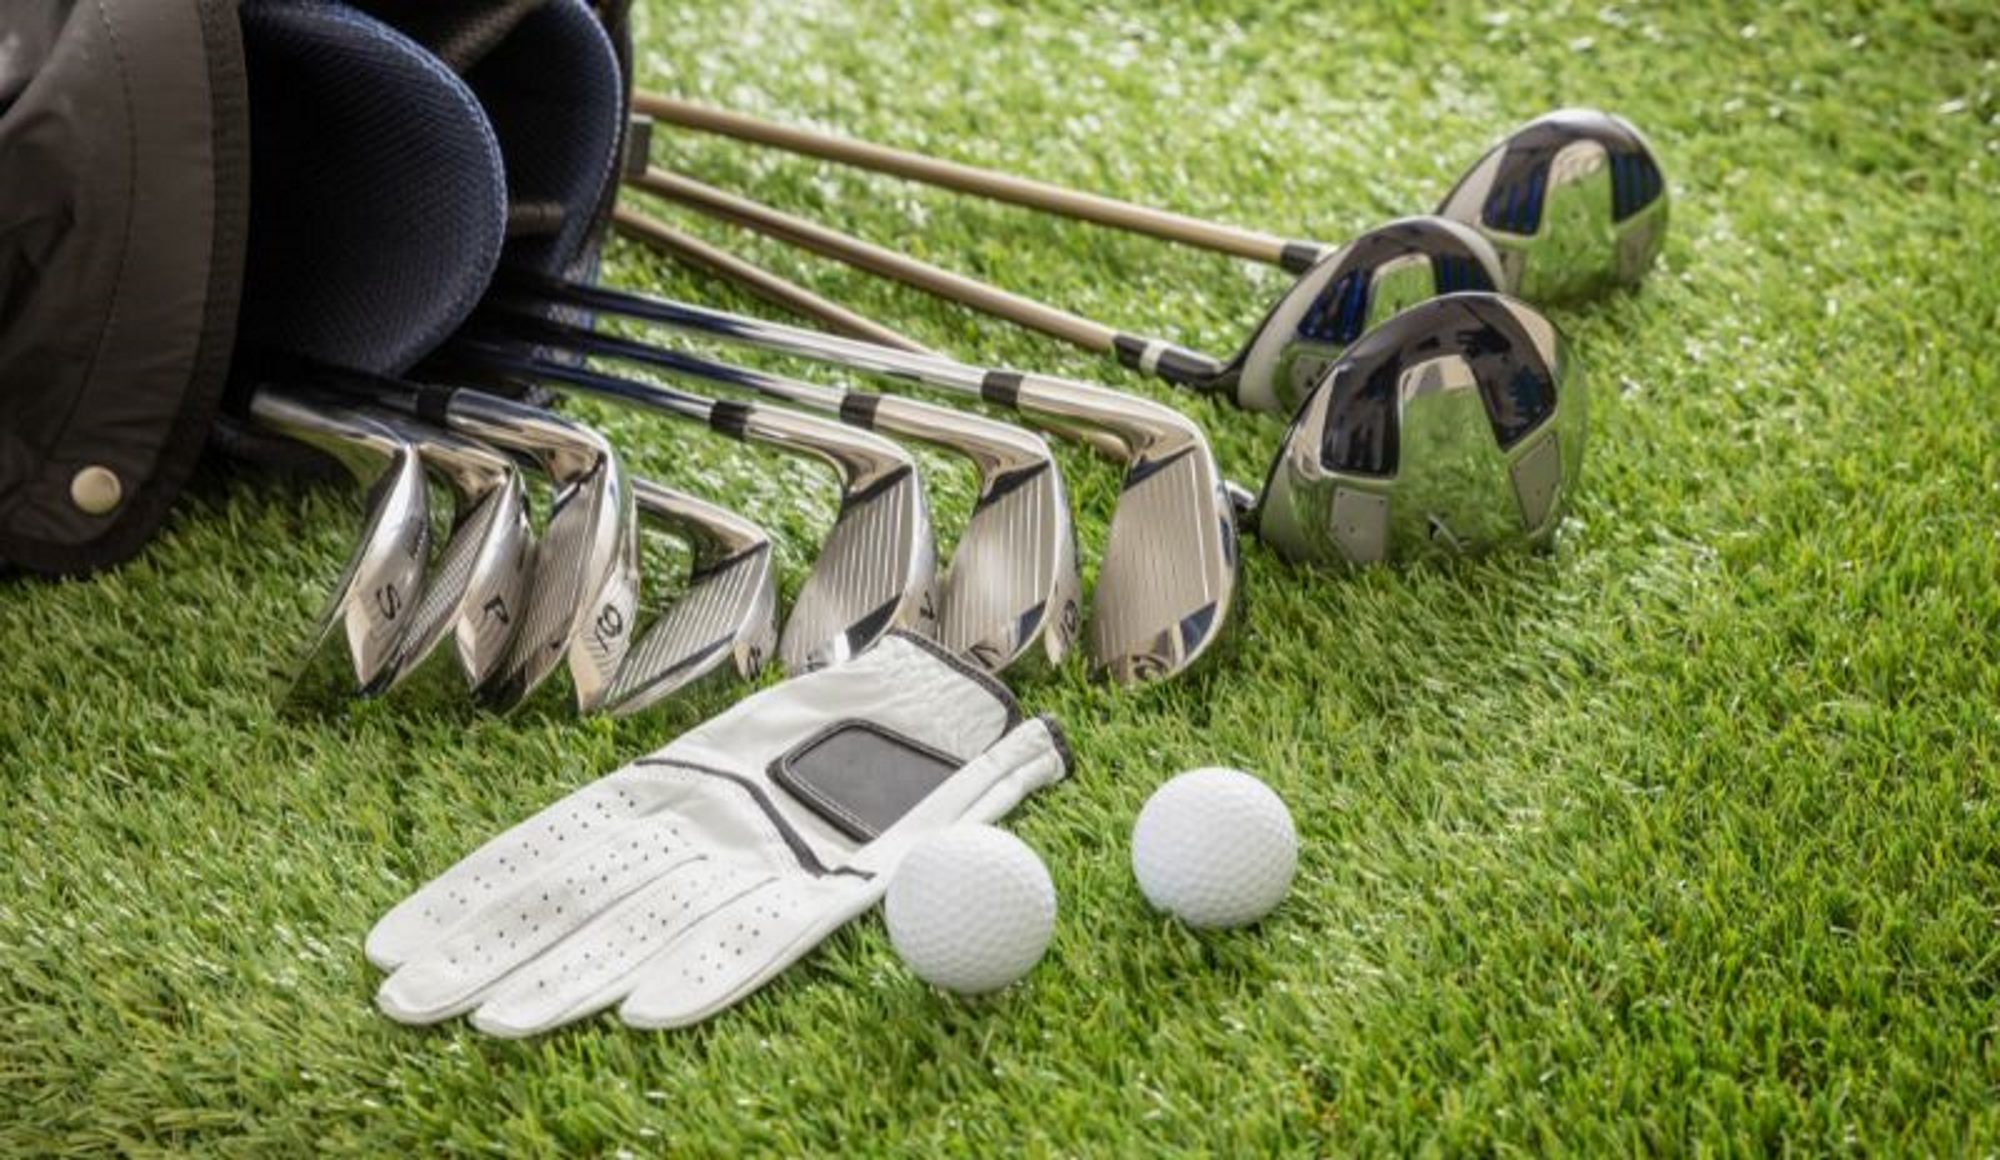 Golf clubs and golfing equipment